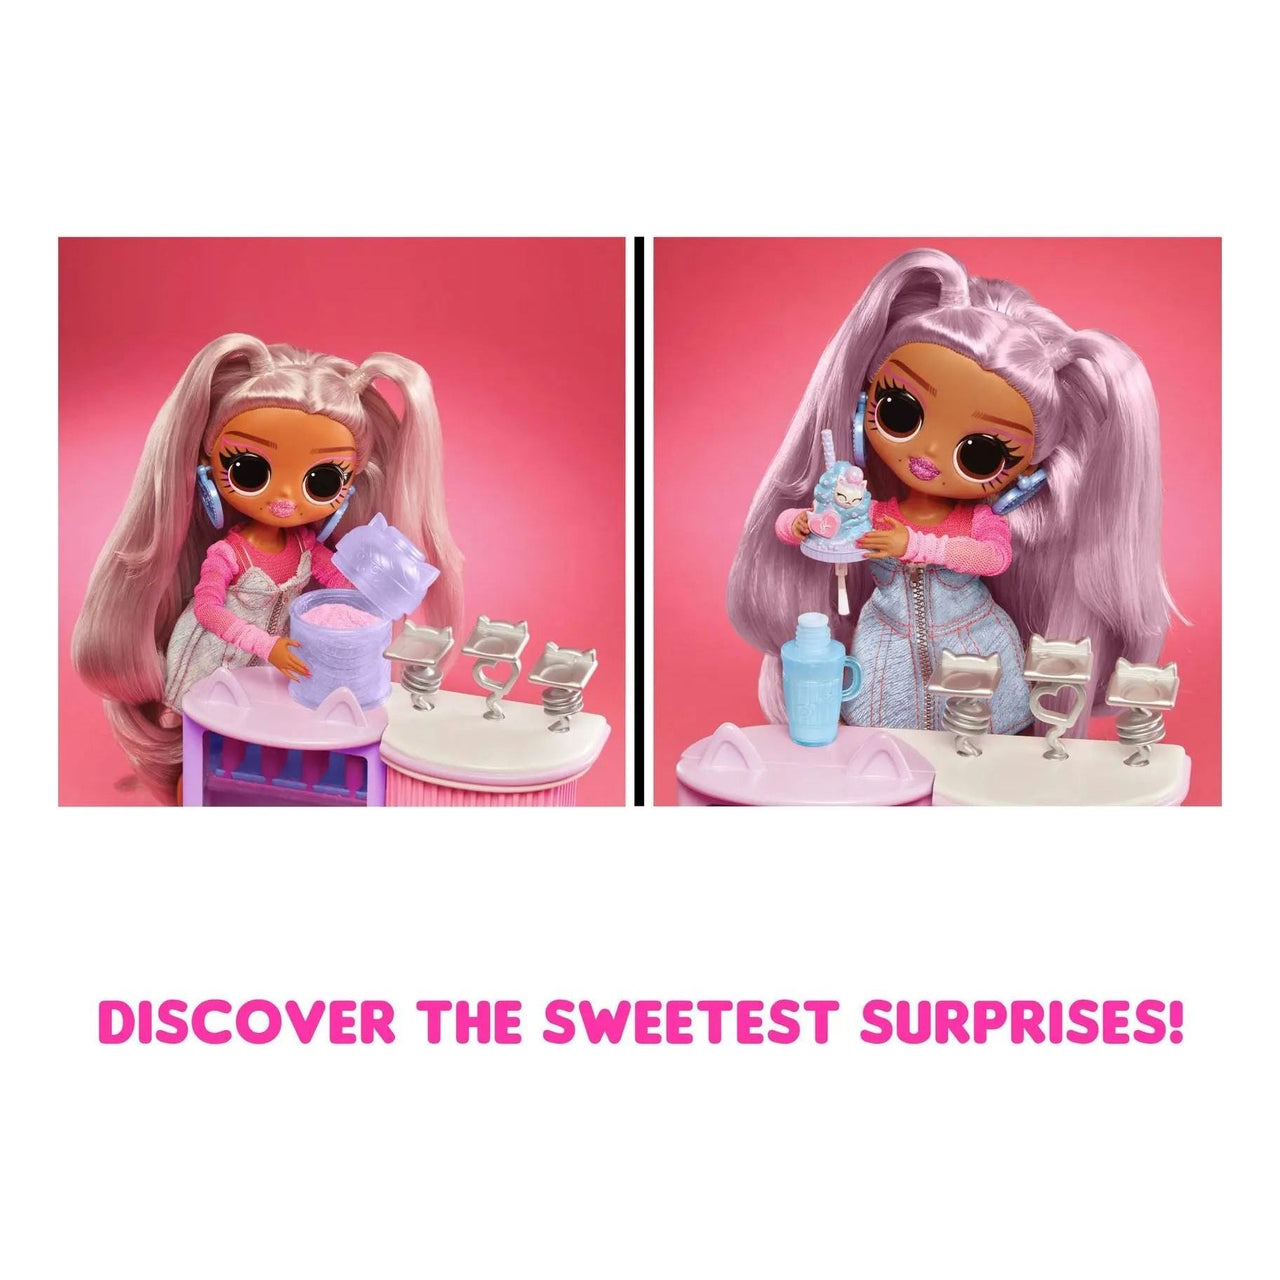 L.O.L Surprise OMG Sweet Nails Kitty K Doll Cafe LOL Surprise